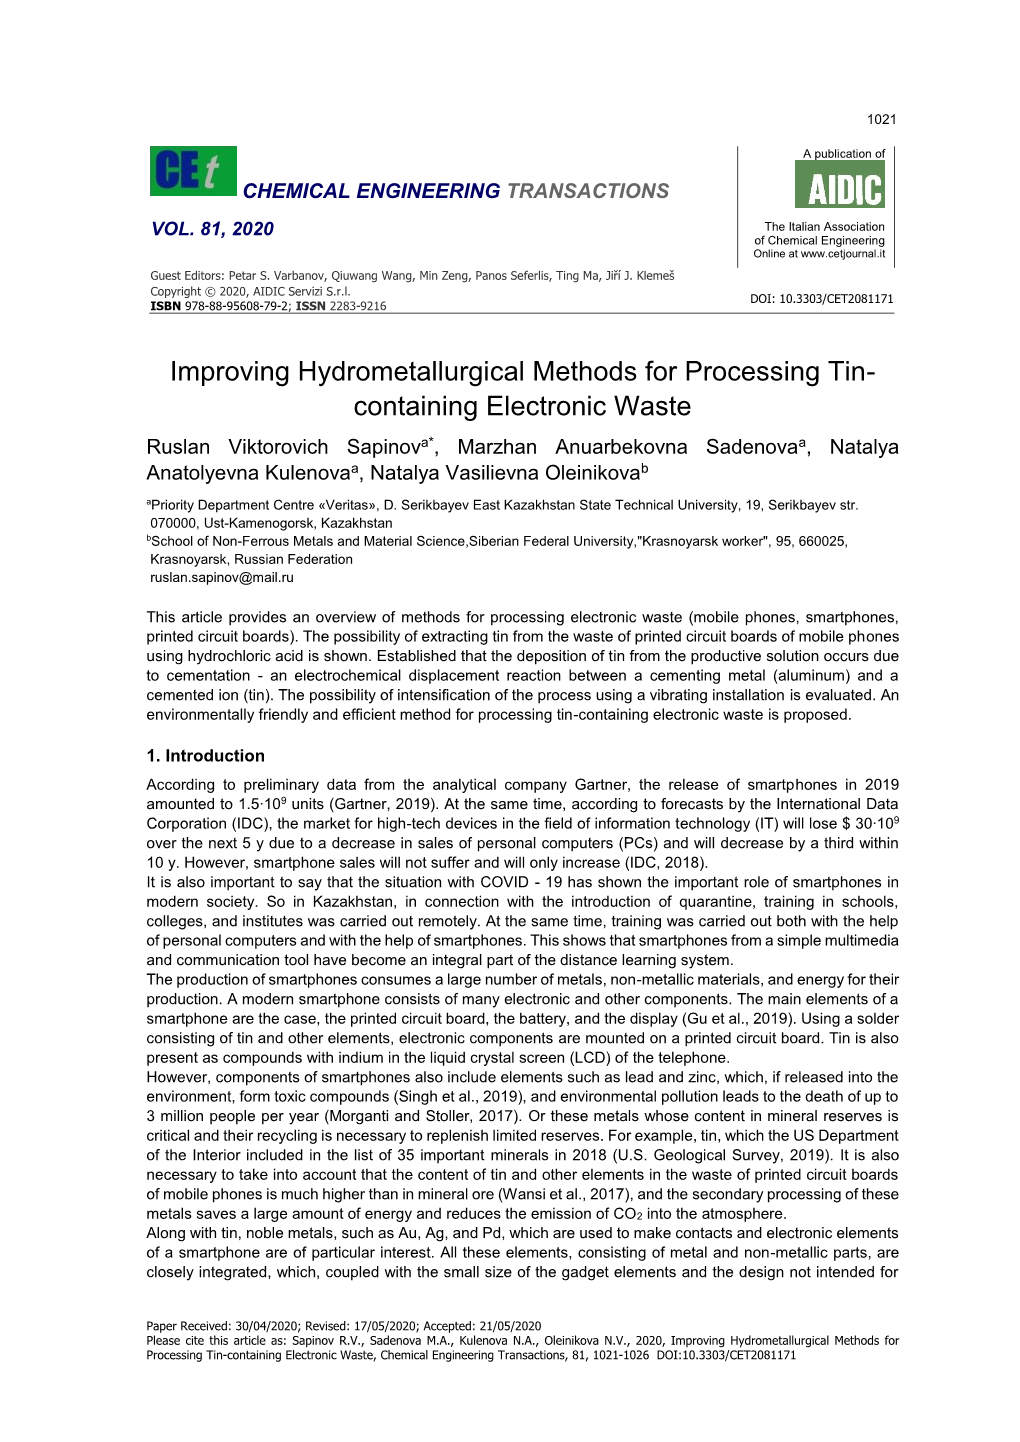 Improving Hydrometallurgical Methods for Processing Tin